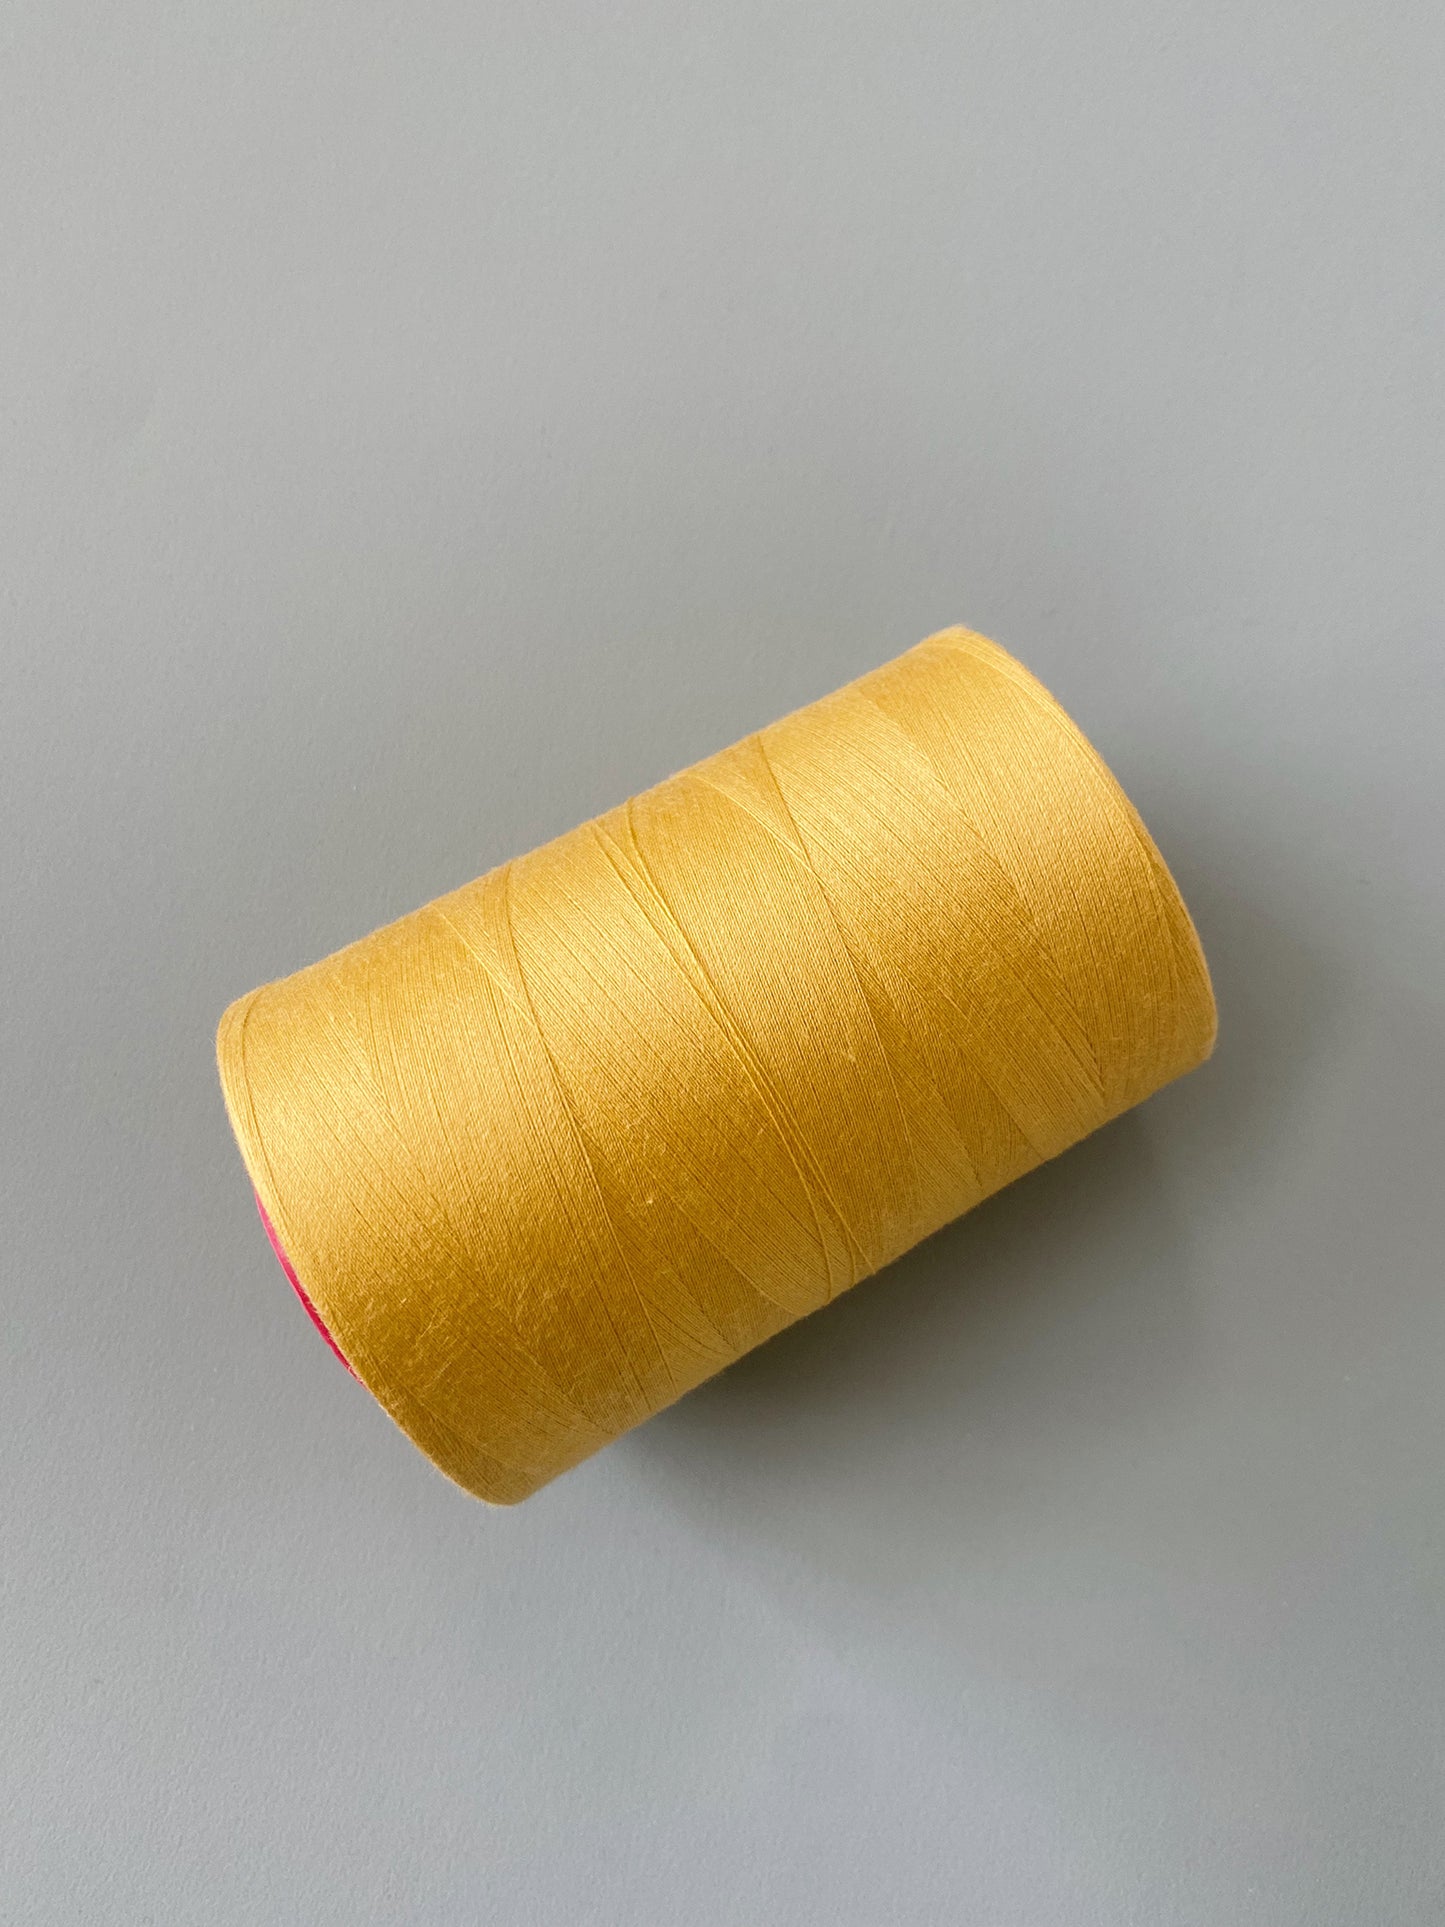 Sewing Thread 5000m for 1 roll, can use machine sewing and hand